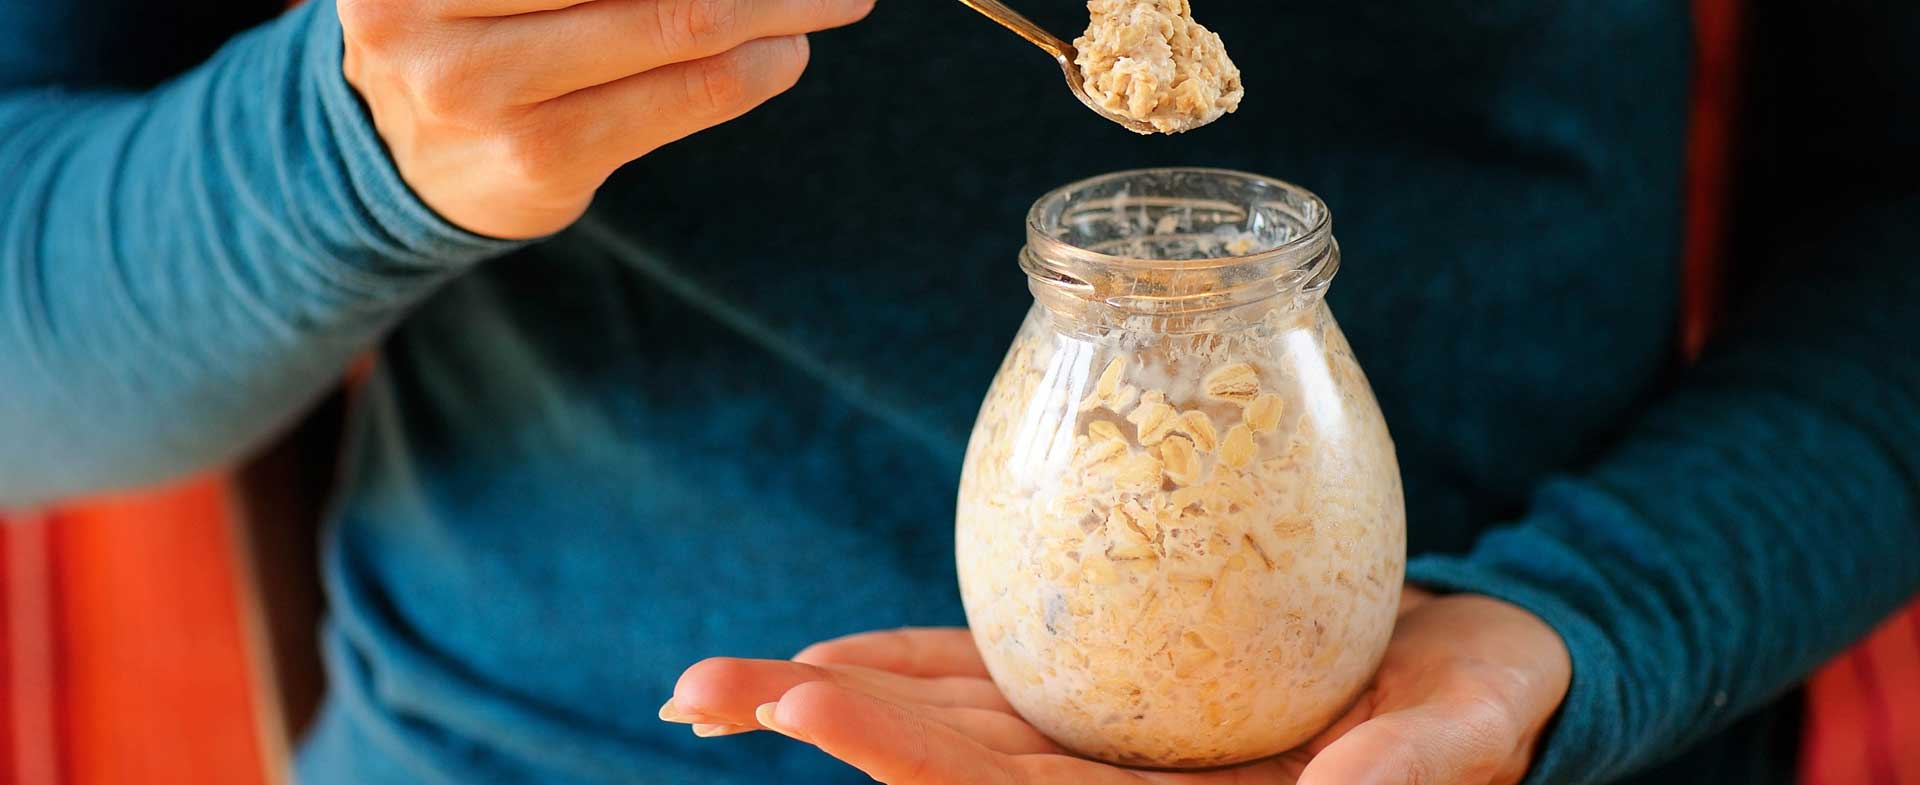 eating overnight oats from a jar 1140x570